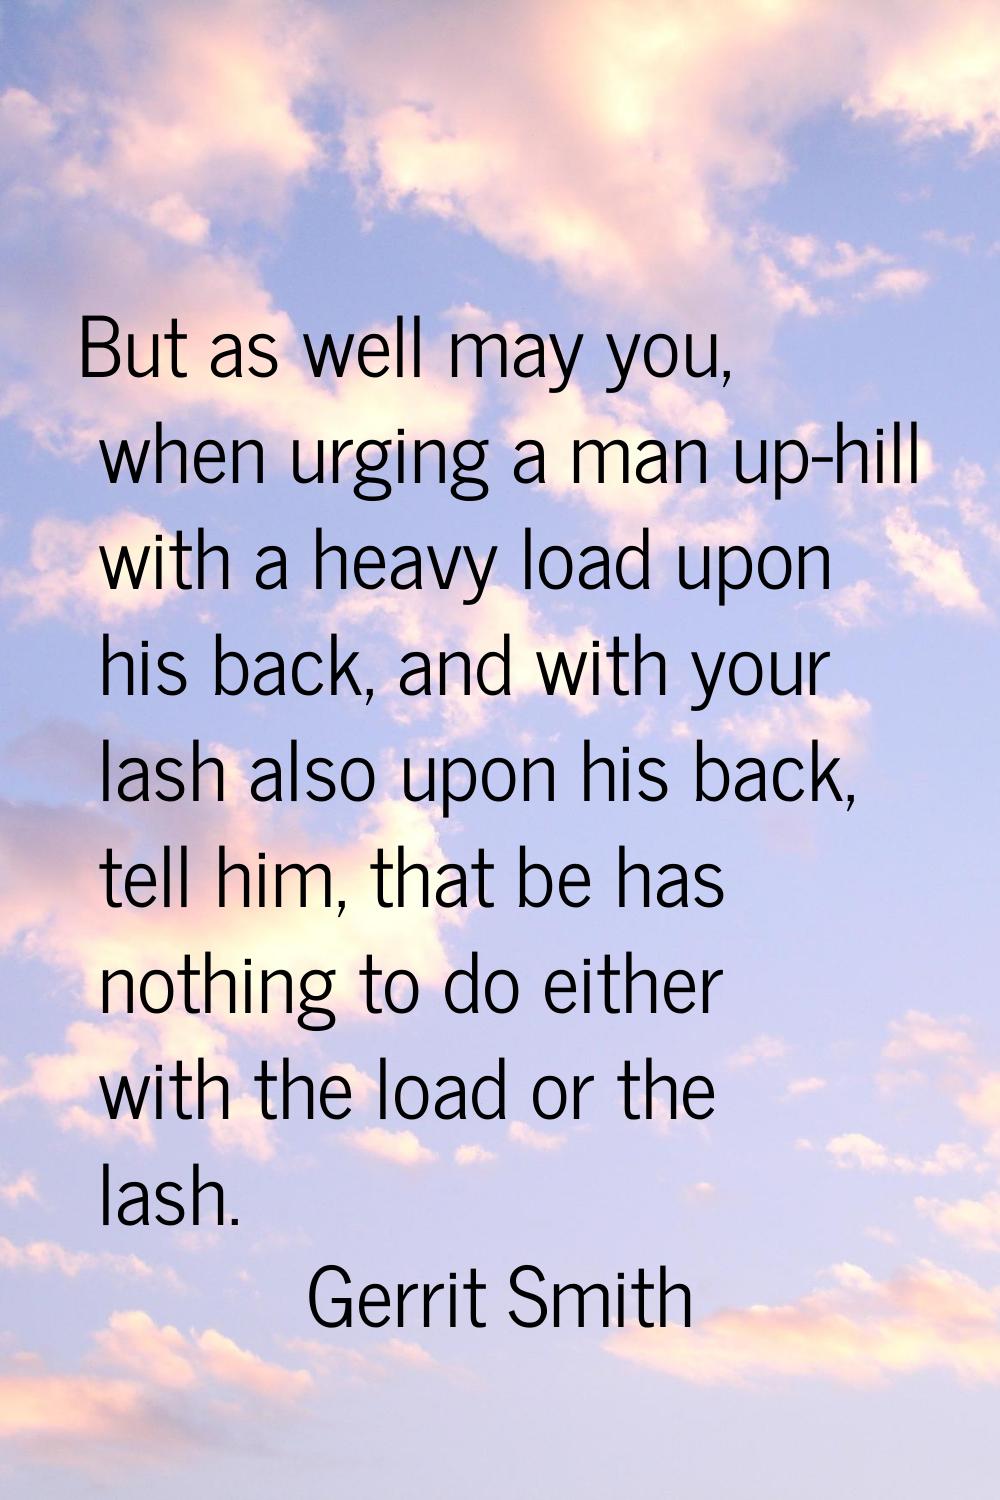 But as well may you, when urging a man up-hill with a heavy load upon his back, and with your lash 